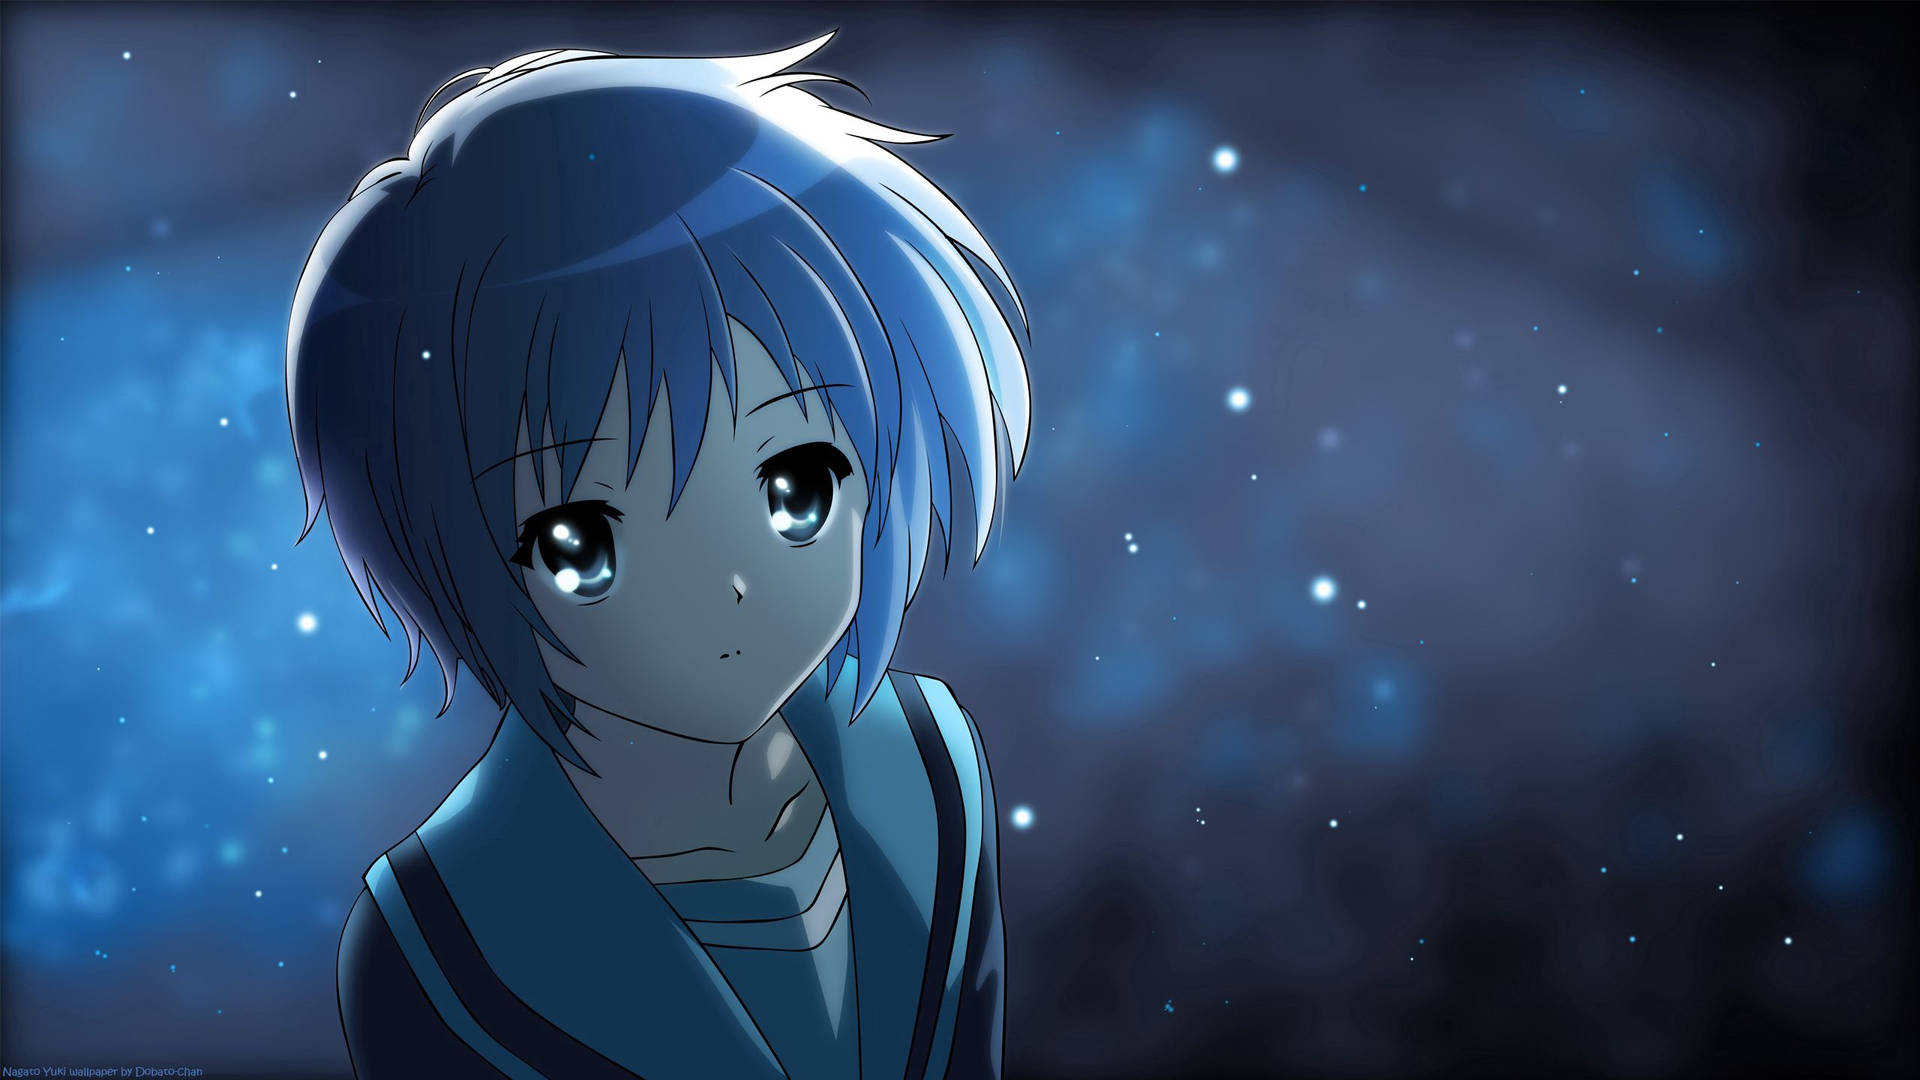 Cute Anime 2560X1440 Wallpaper and Background Image